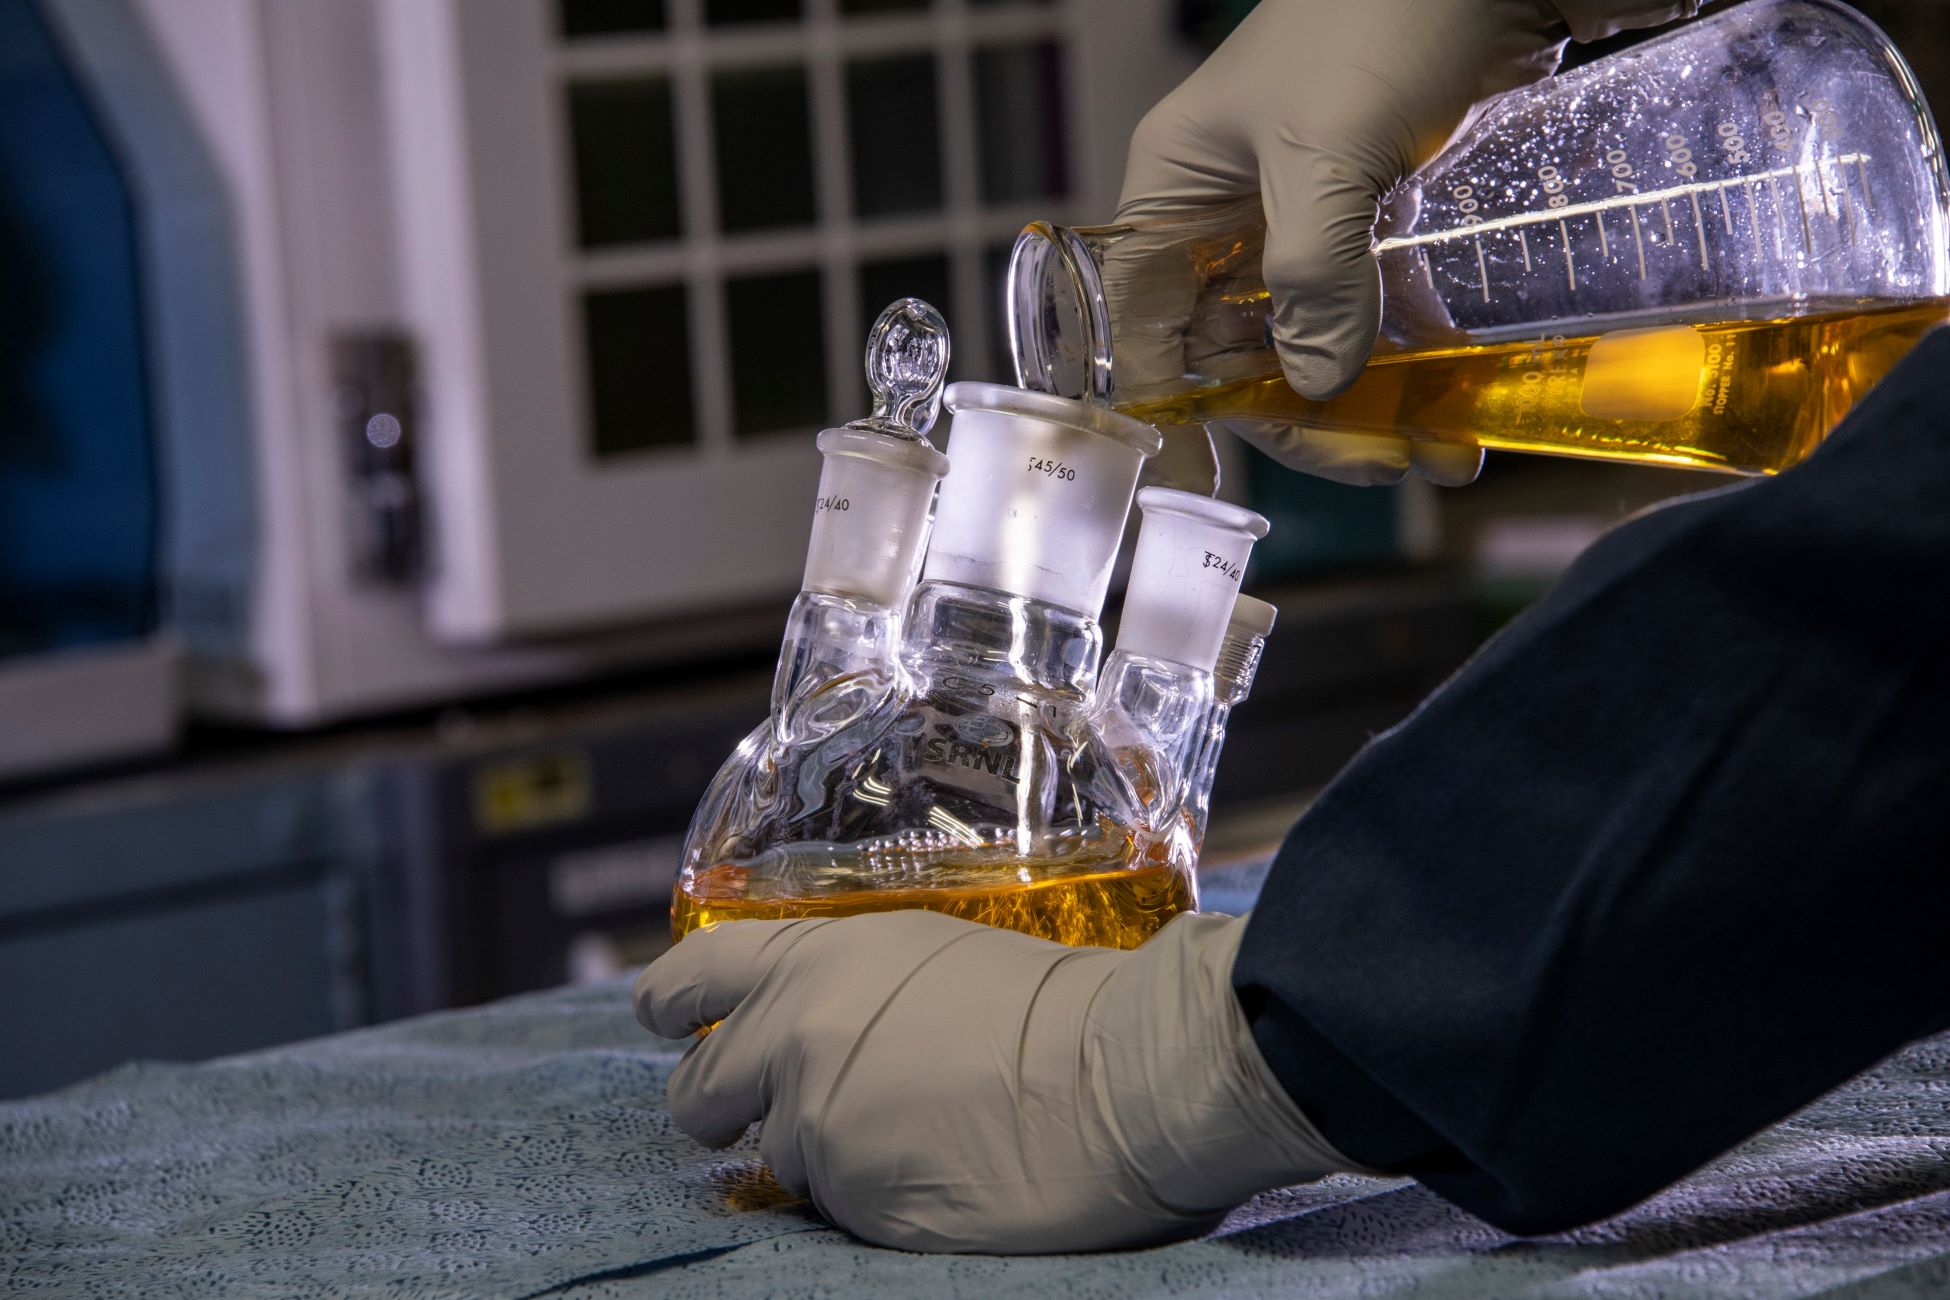 A scientist wearing gloves pouring liquid from flask into a beaker